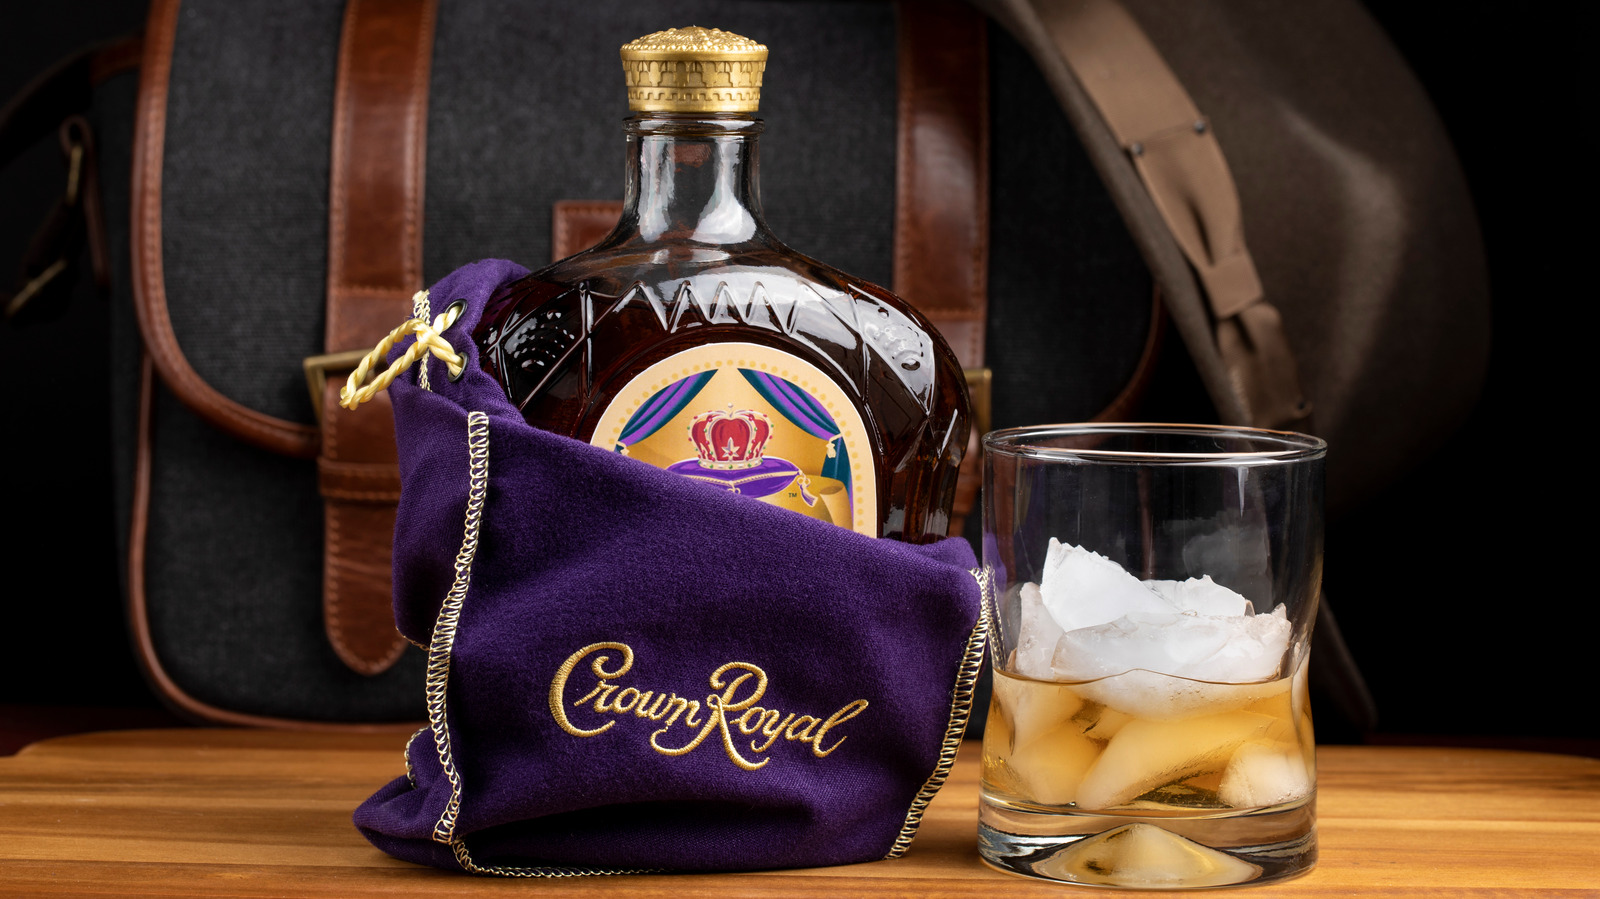 Crown Royal Salted Caramel Whisky - Old Town Tequila